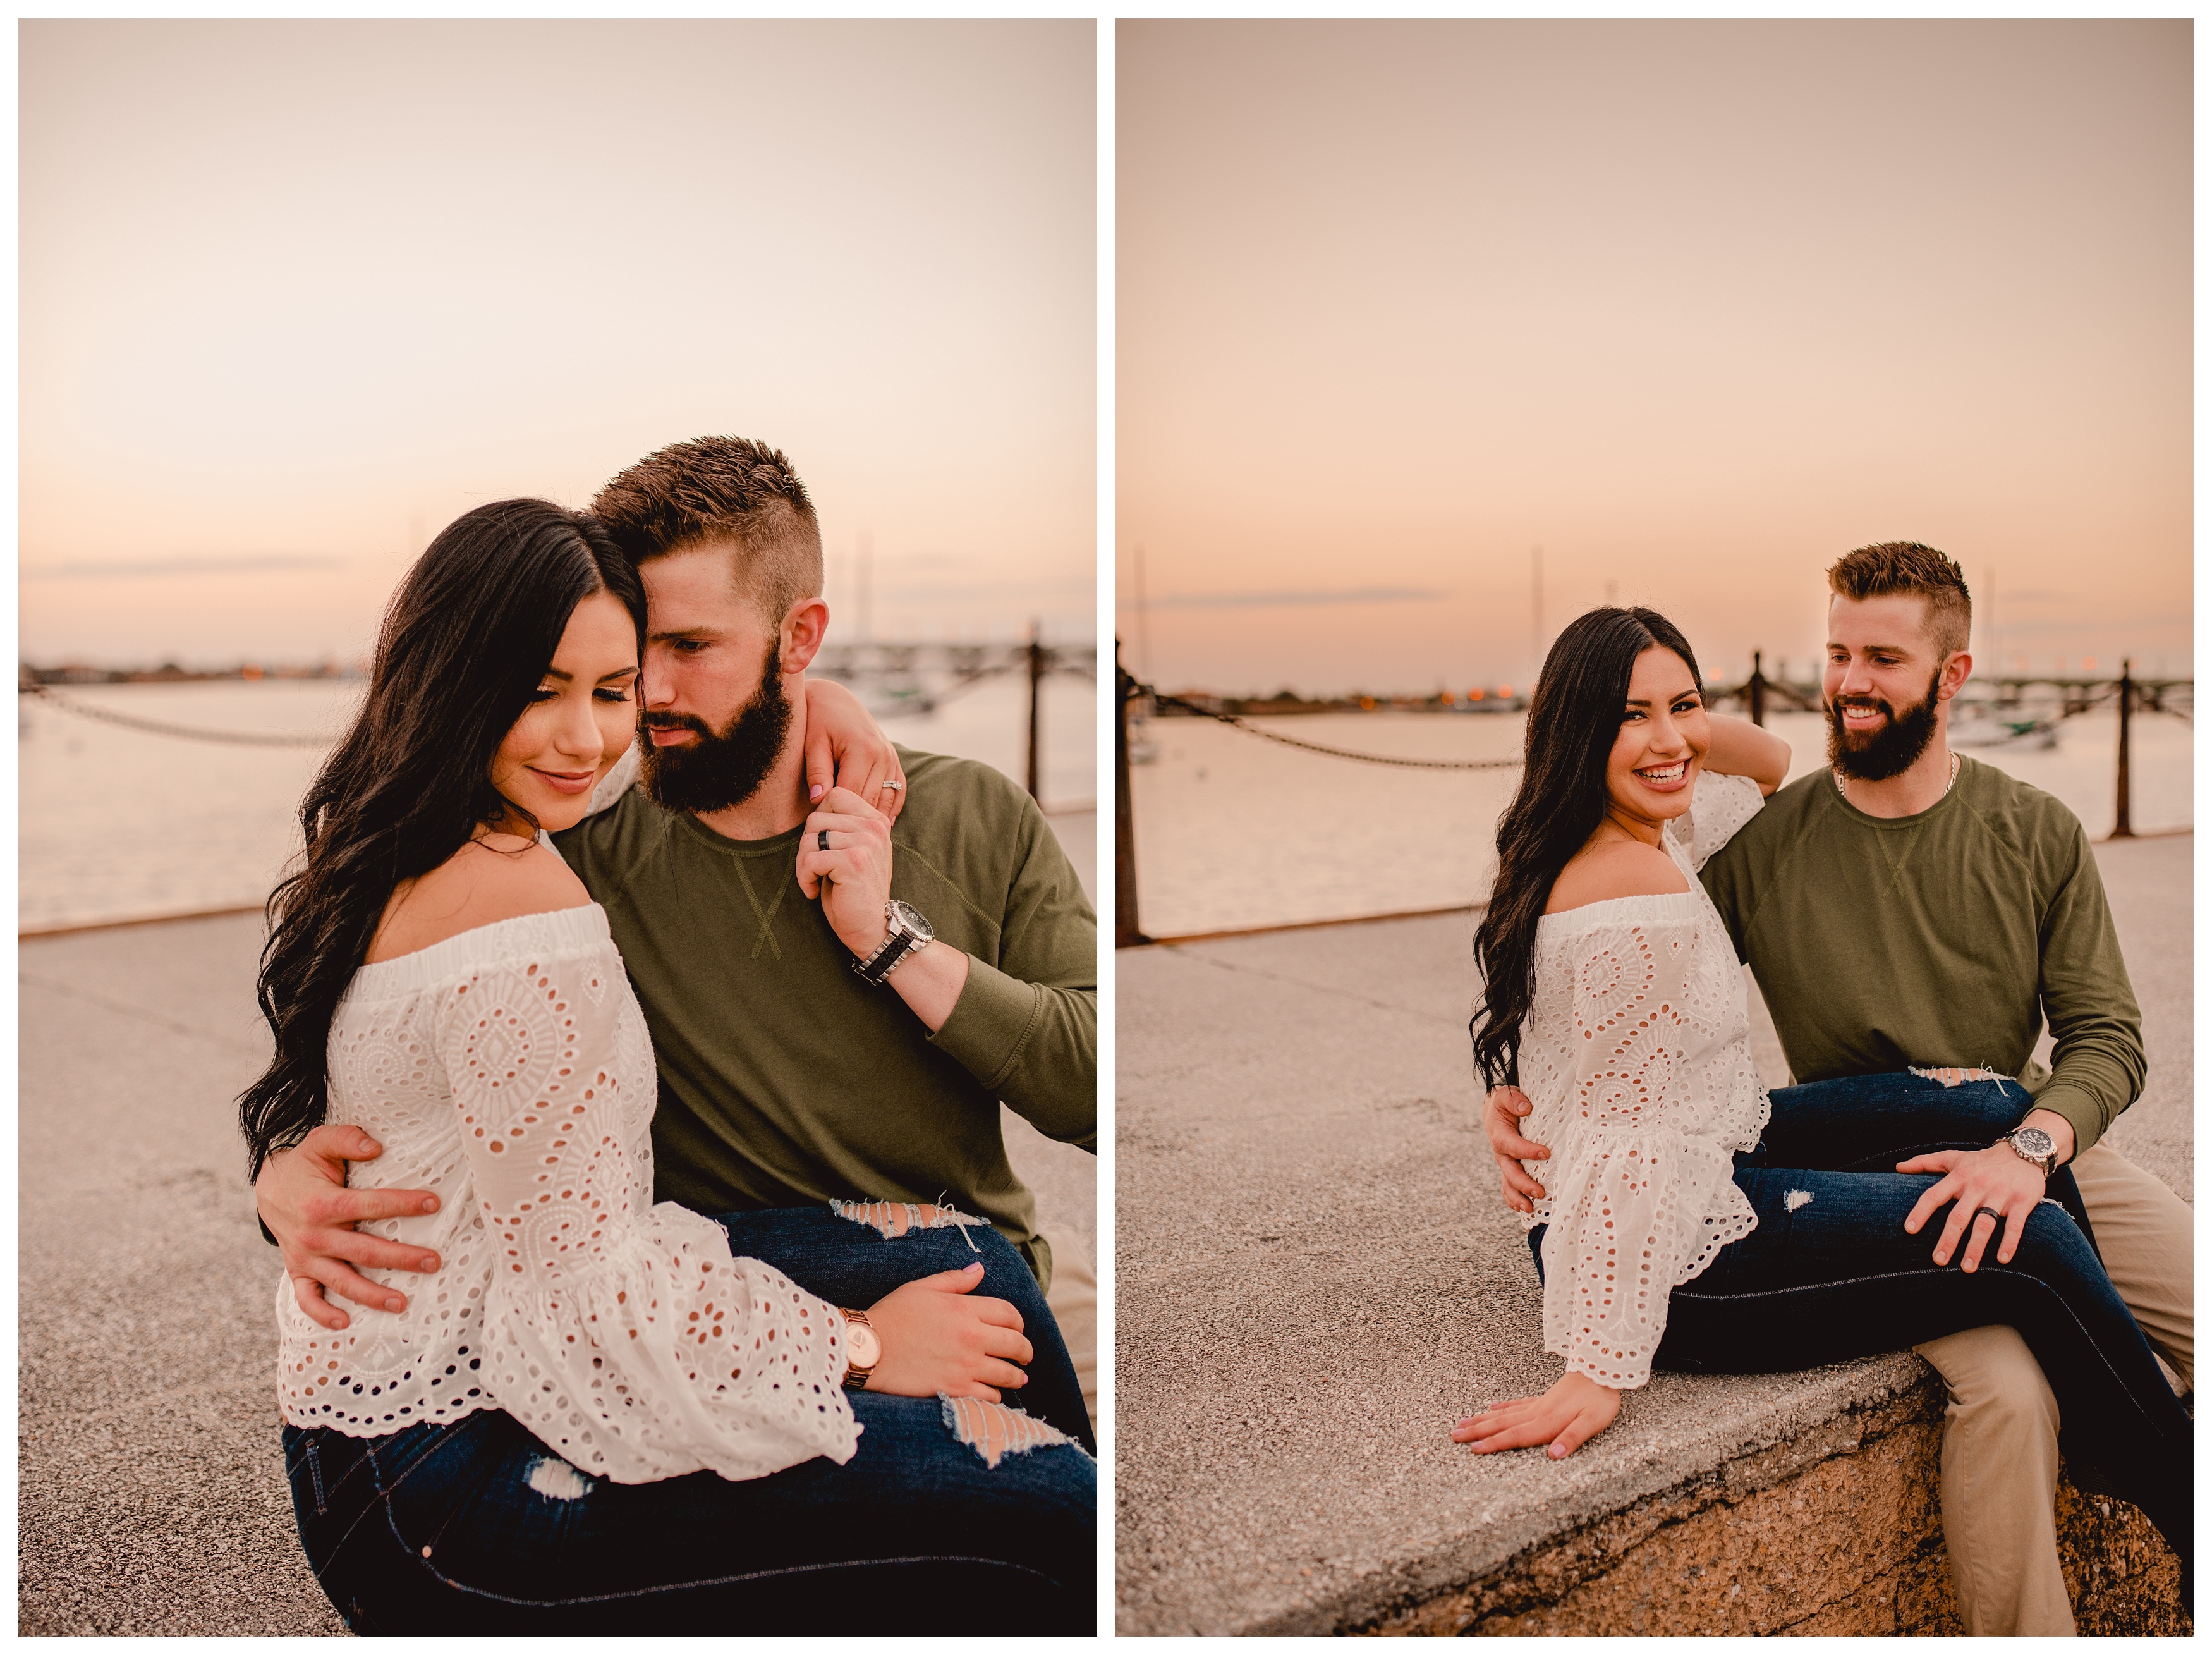 Intimate couples pictures near the ocean in Florida for adventurous engagement. Shelly Williams Photography